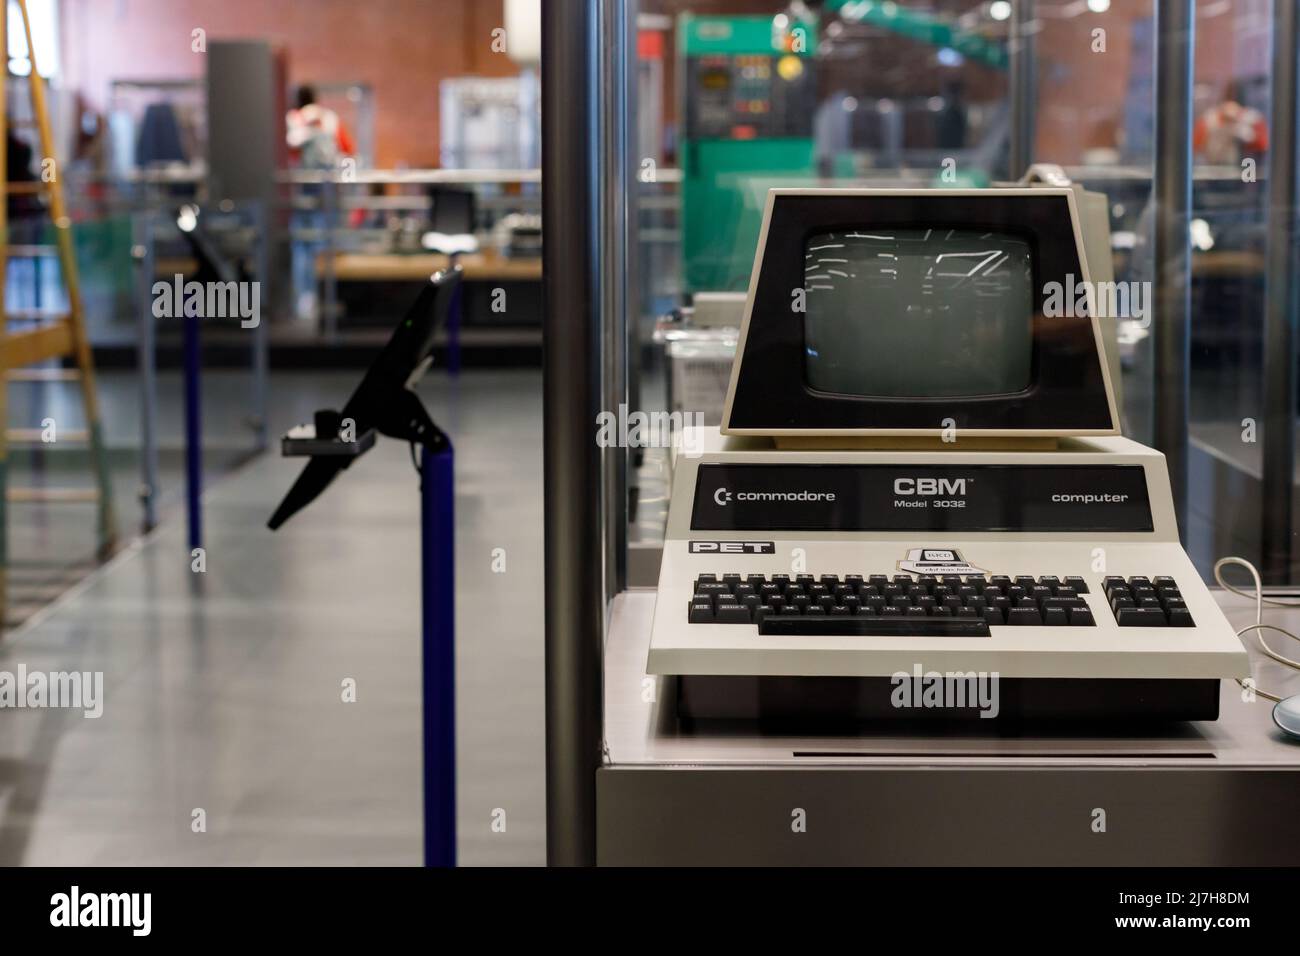 Oslo, Norway. May 01, 2022: A vintage Commodore PET 3032 computer at the Oslo Museum of Technology. Stock Photo